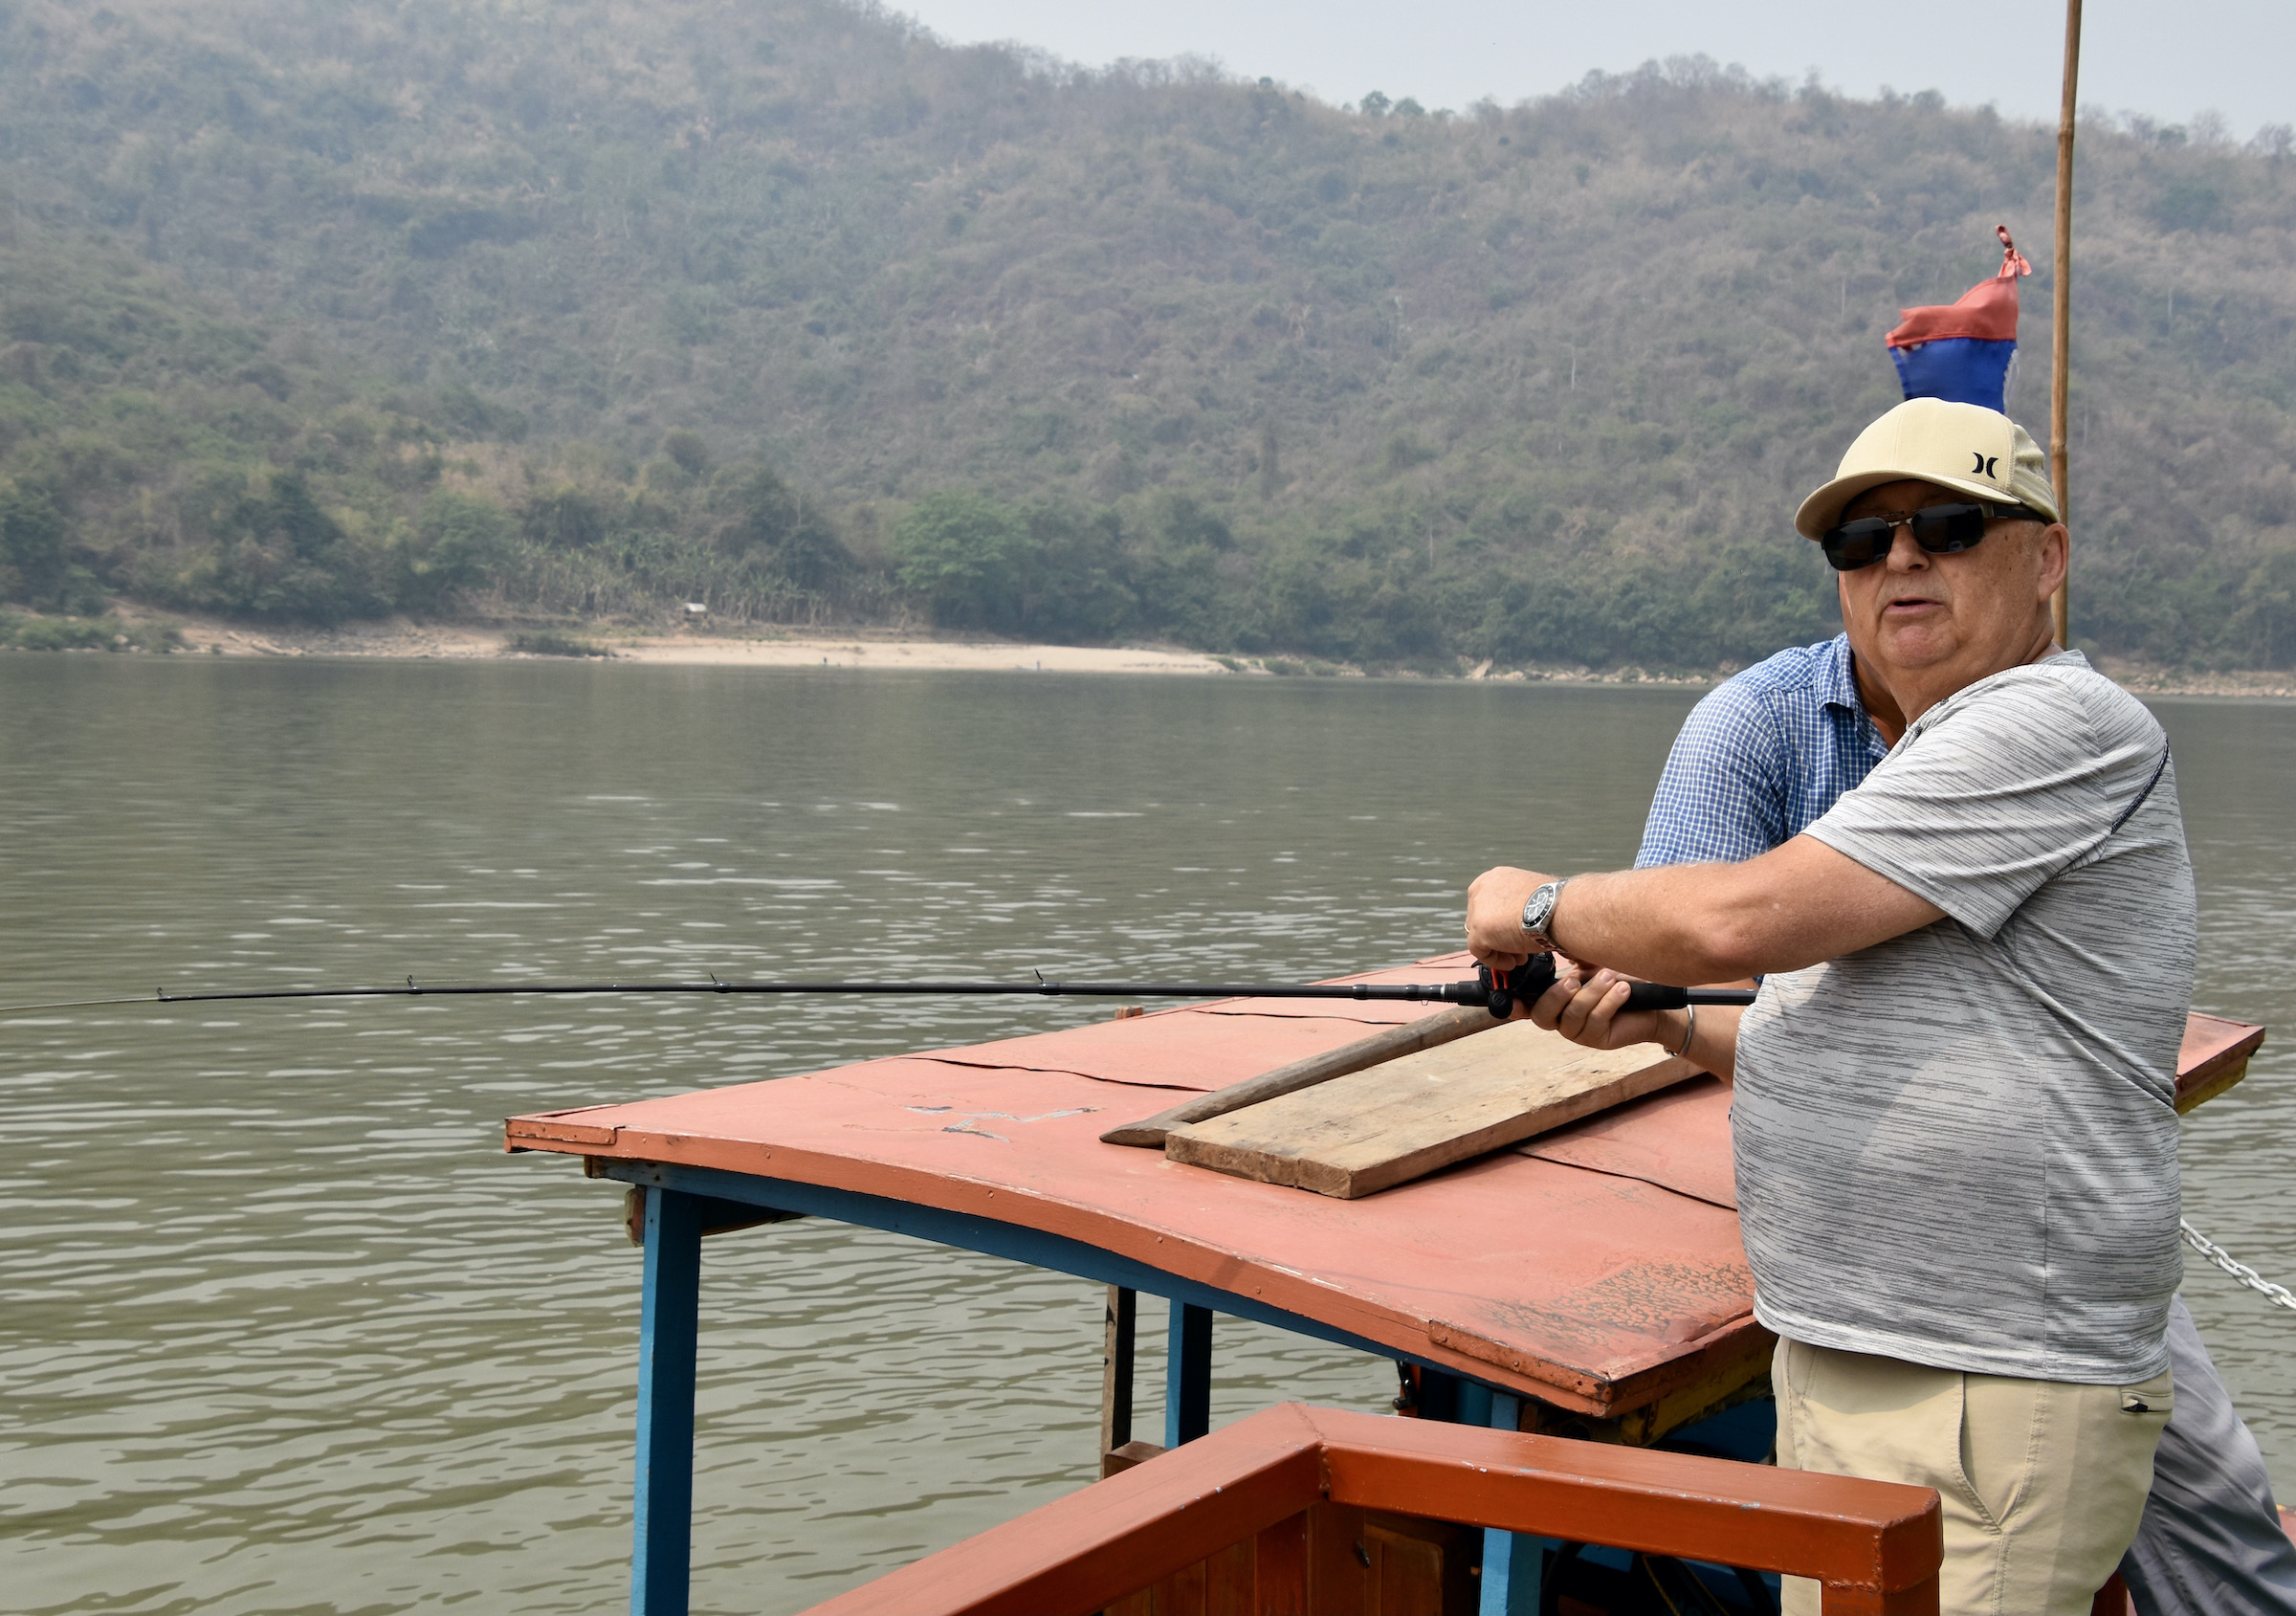 Claude Casts a Line in the Mekong River